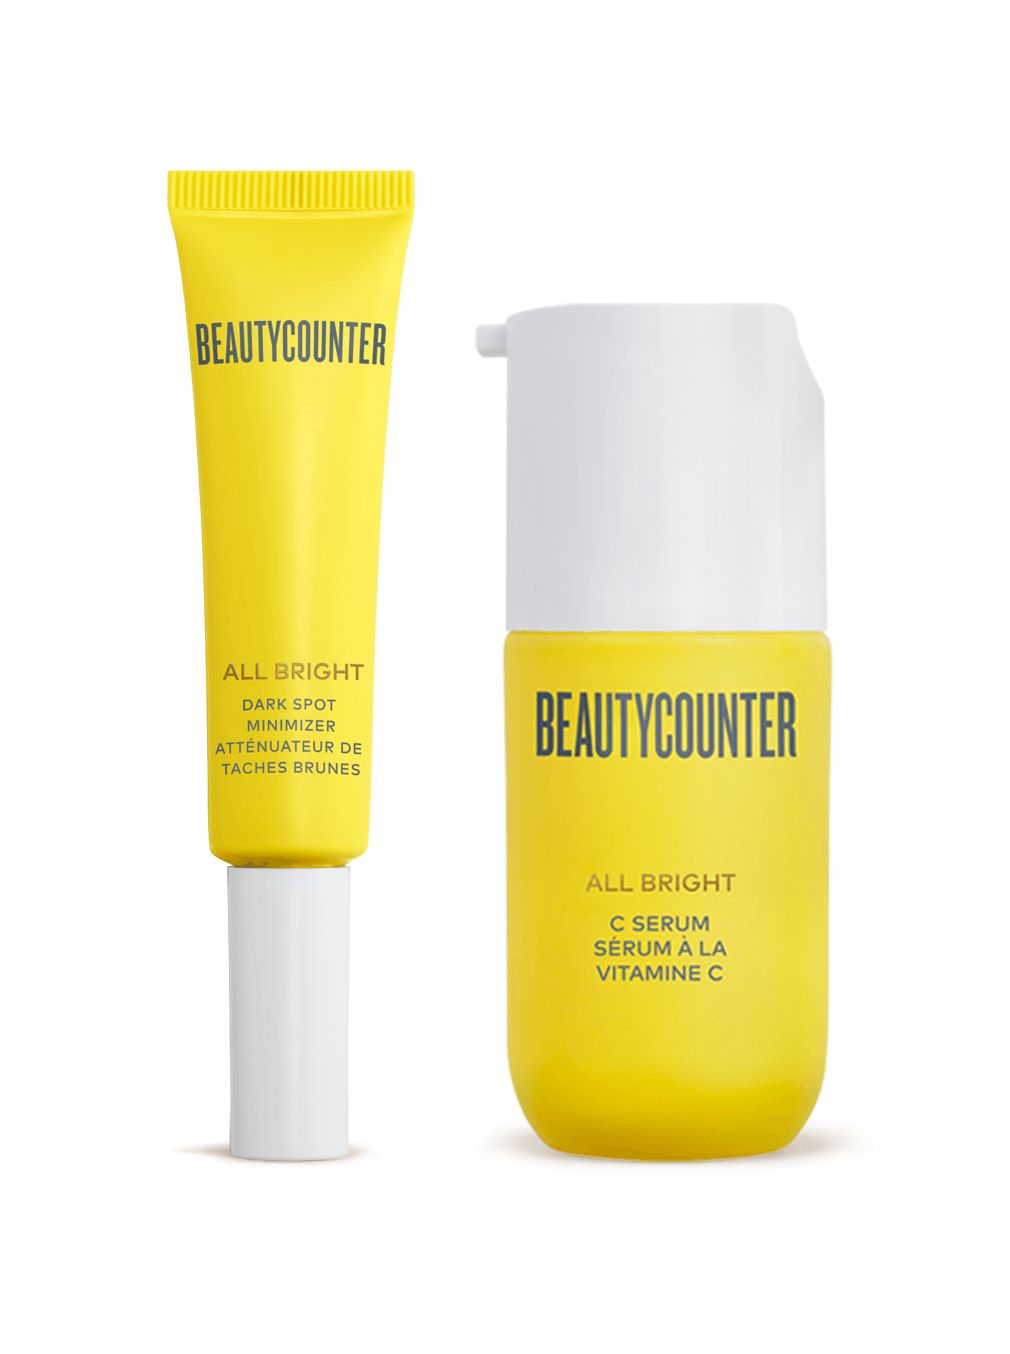 All Bright Duo ($152 Value) - Beautycounter - Skin Care, Makeup, Bath and Body and more! | Beautycounter.com